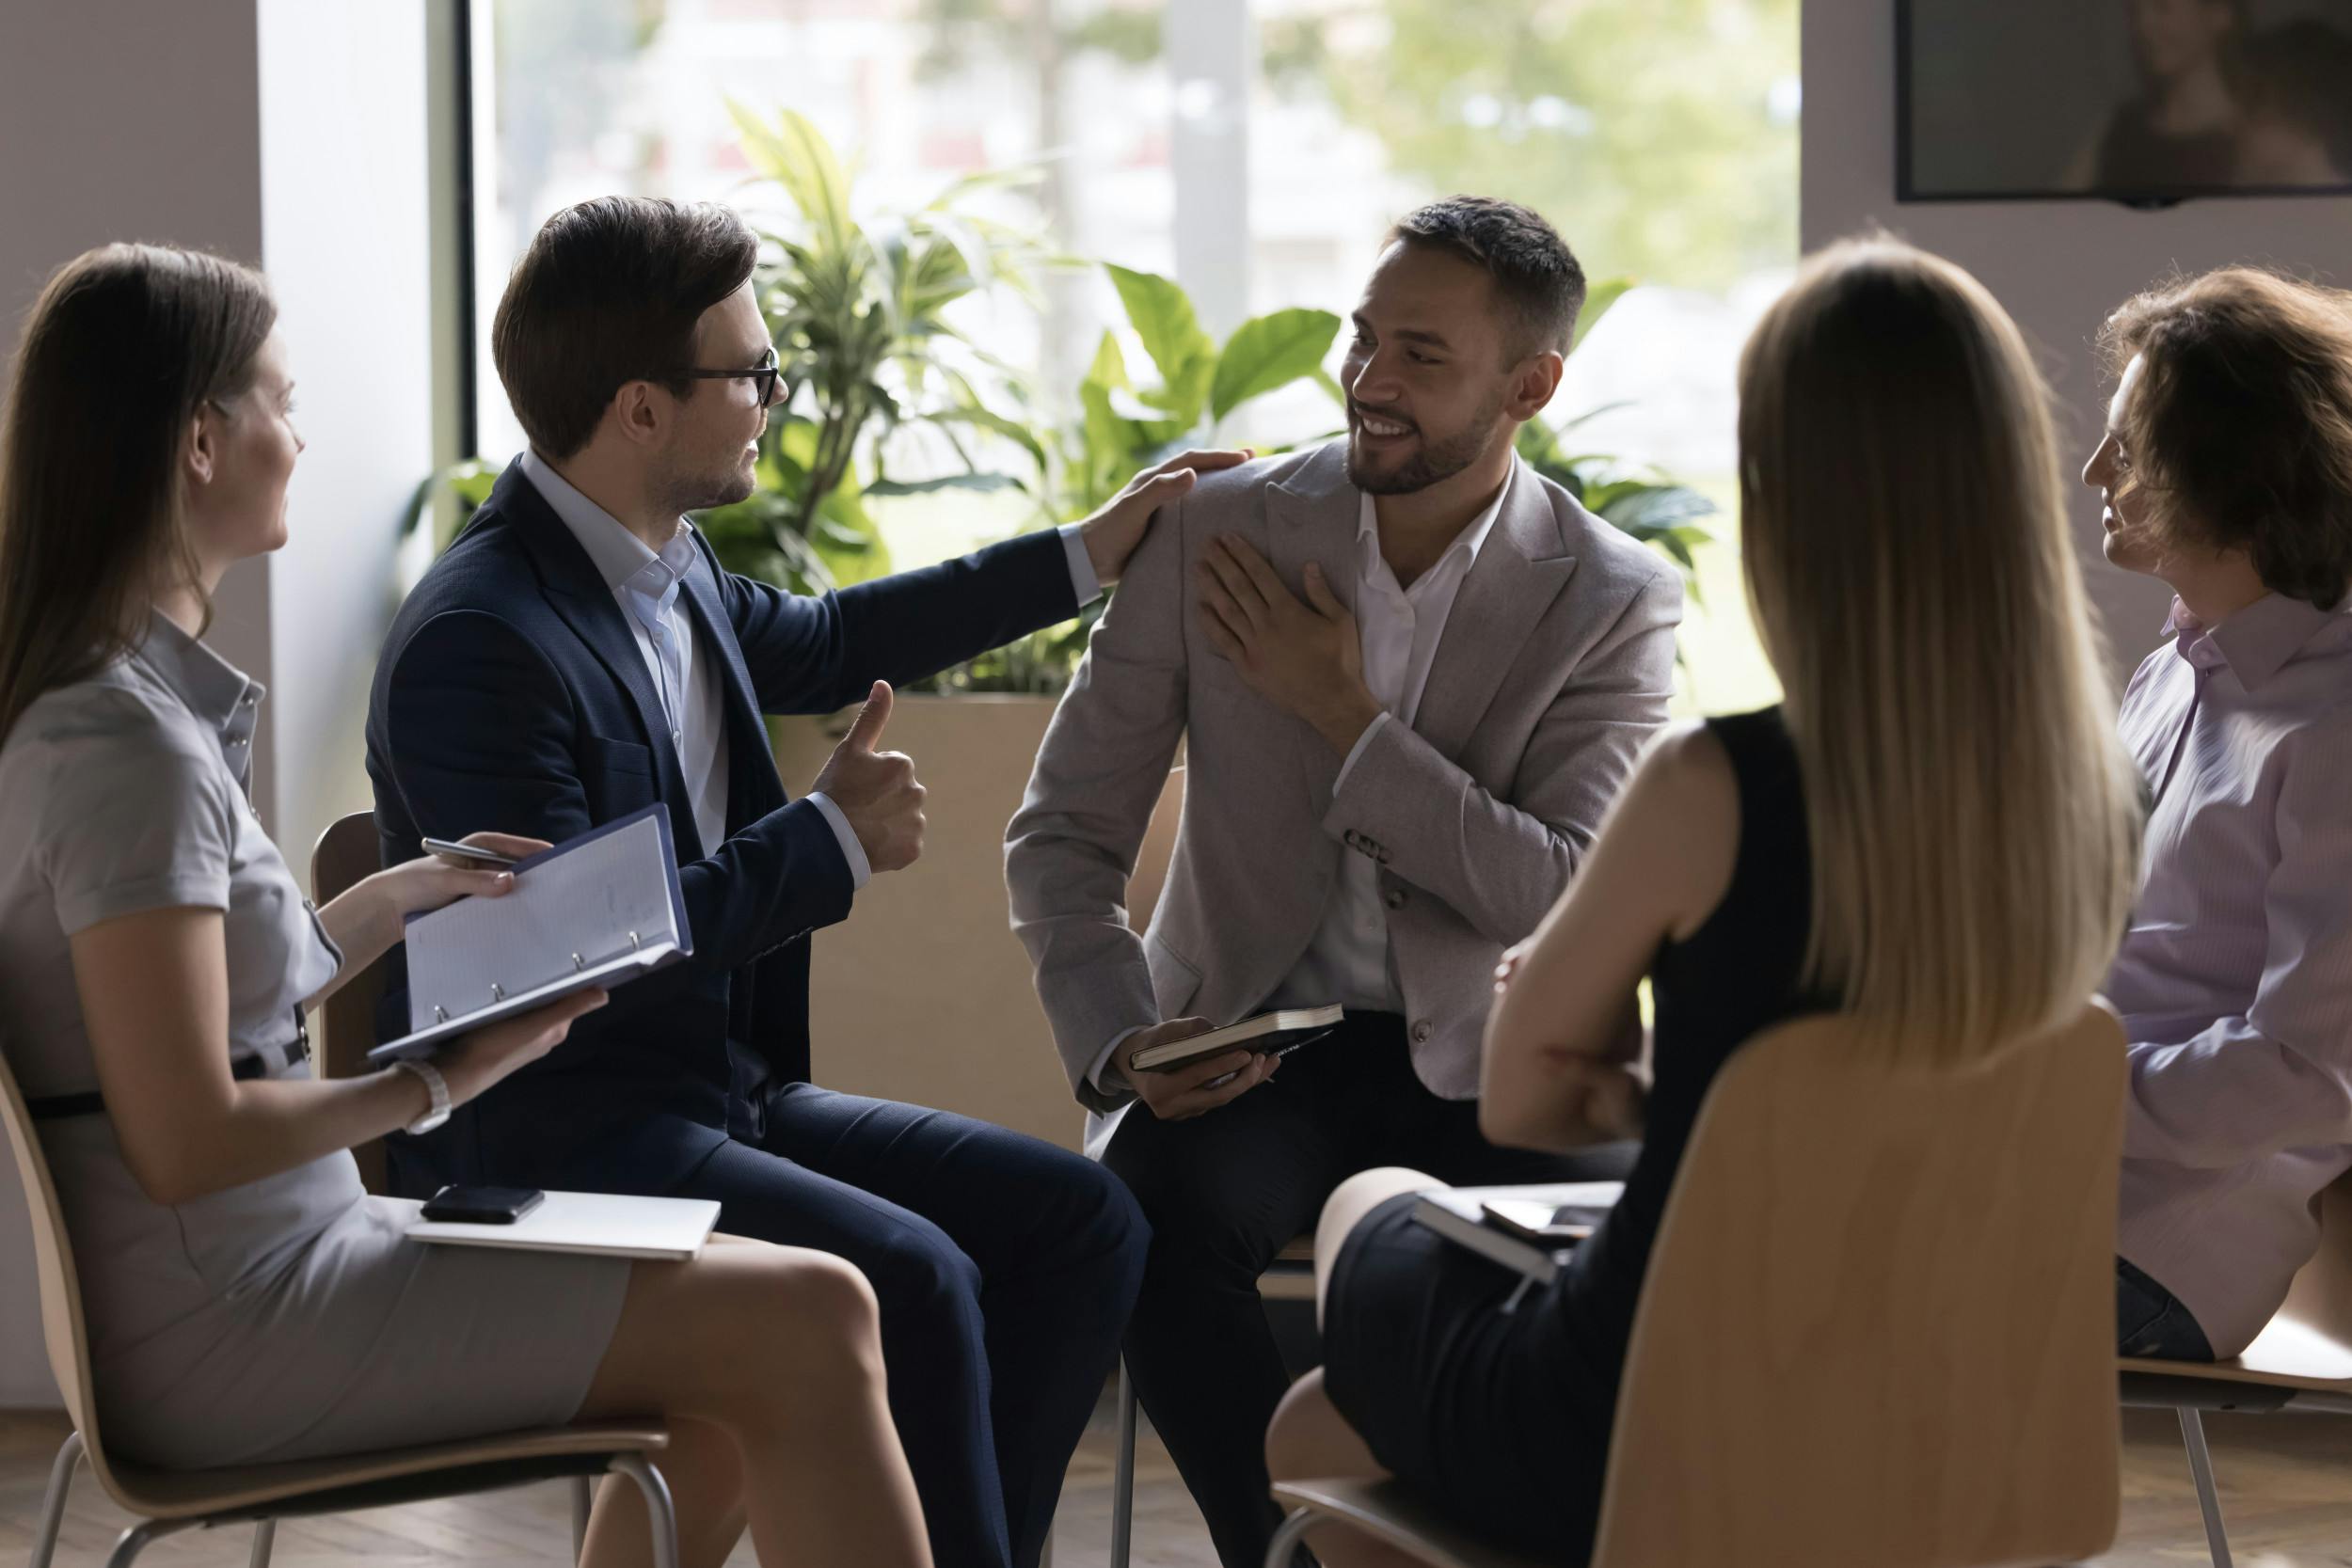 Four Ways to Foster Connection and Support Your Employees’ Experience